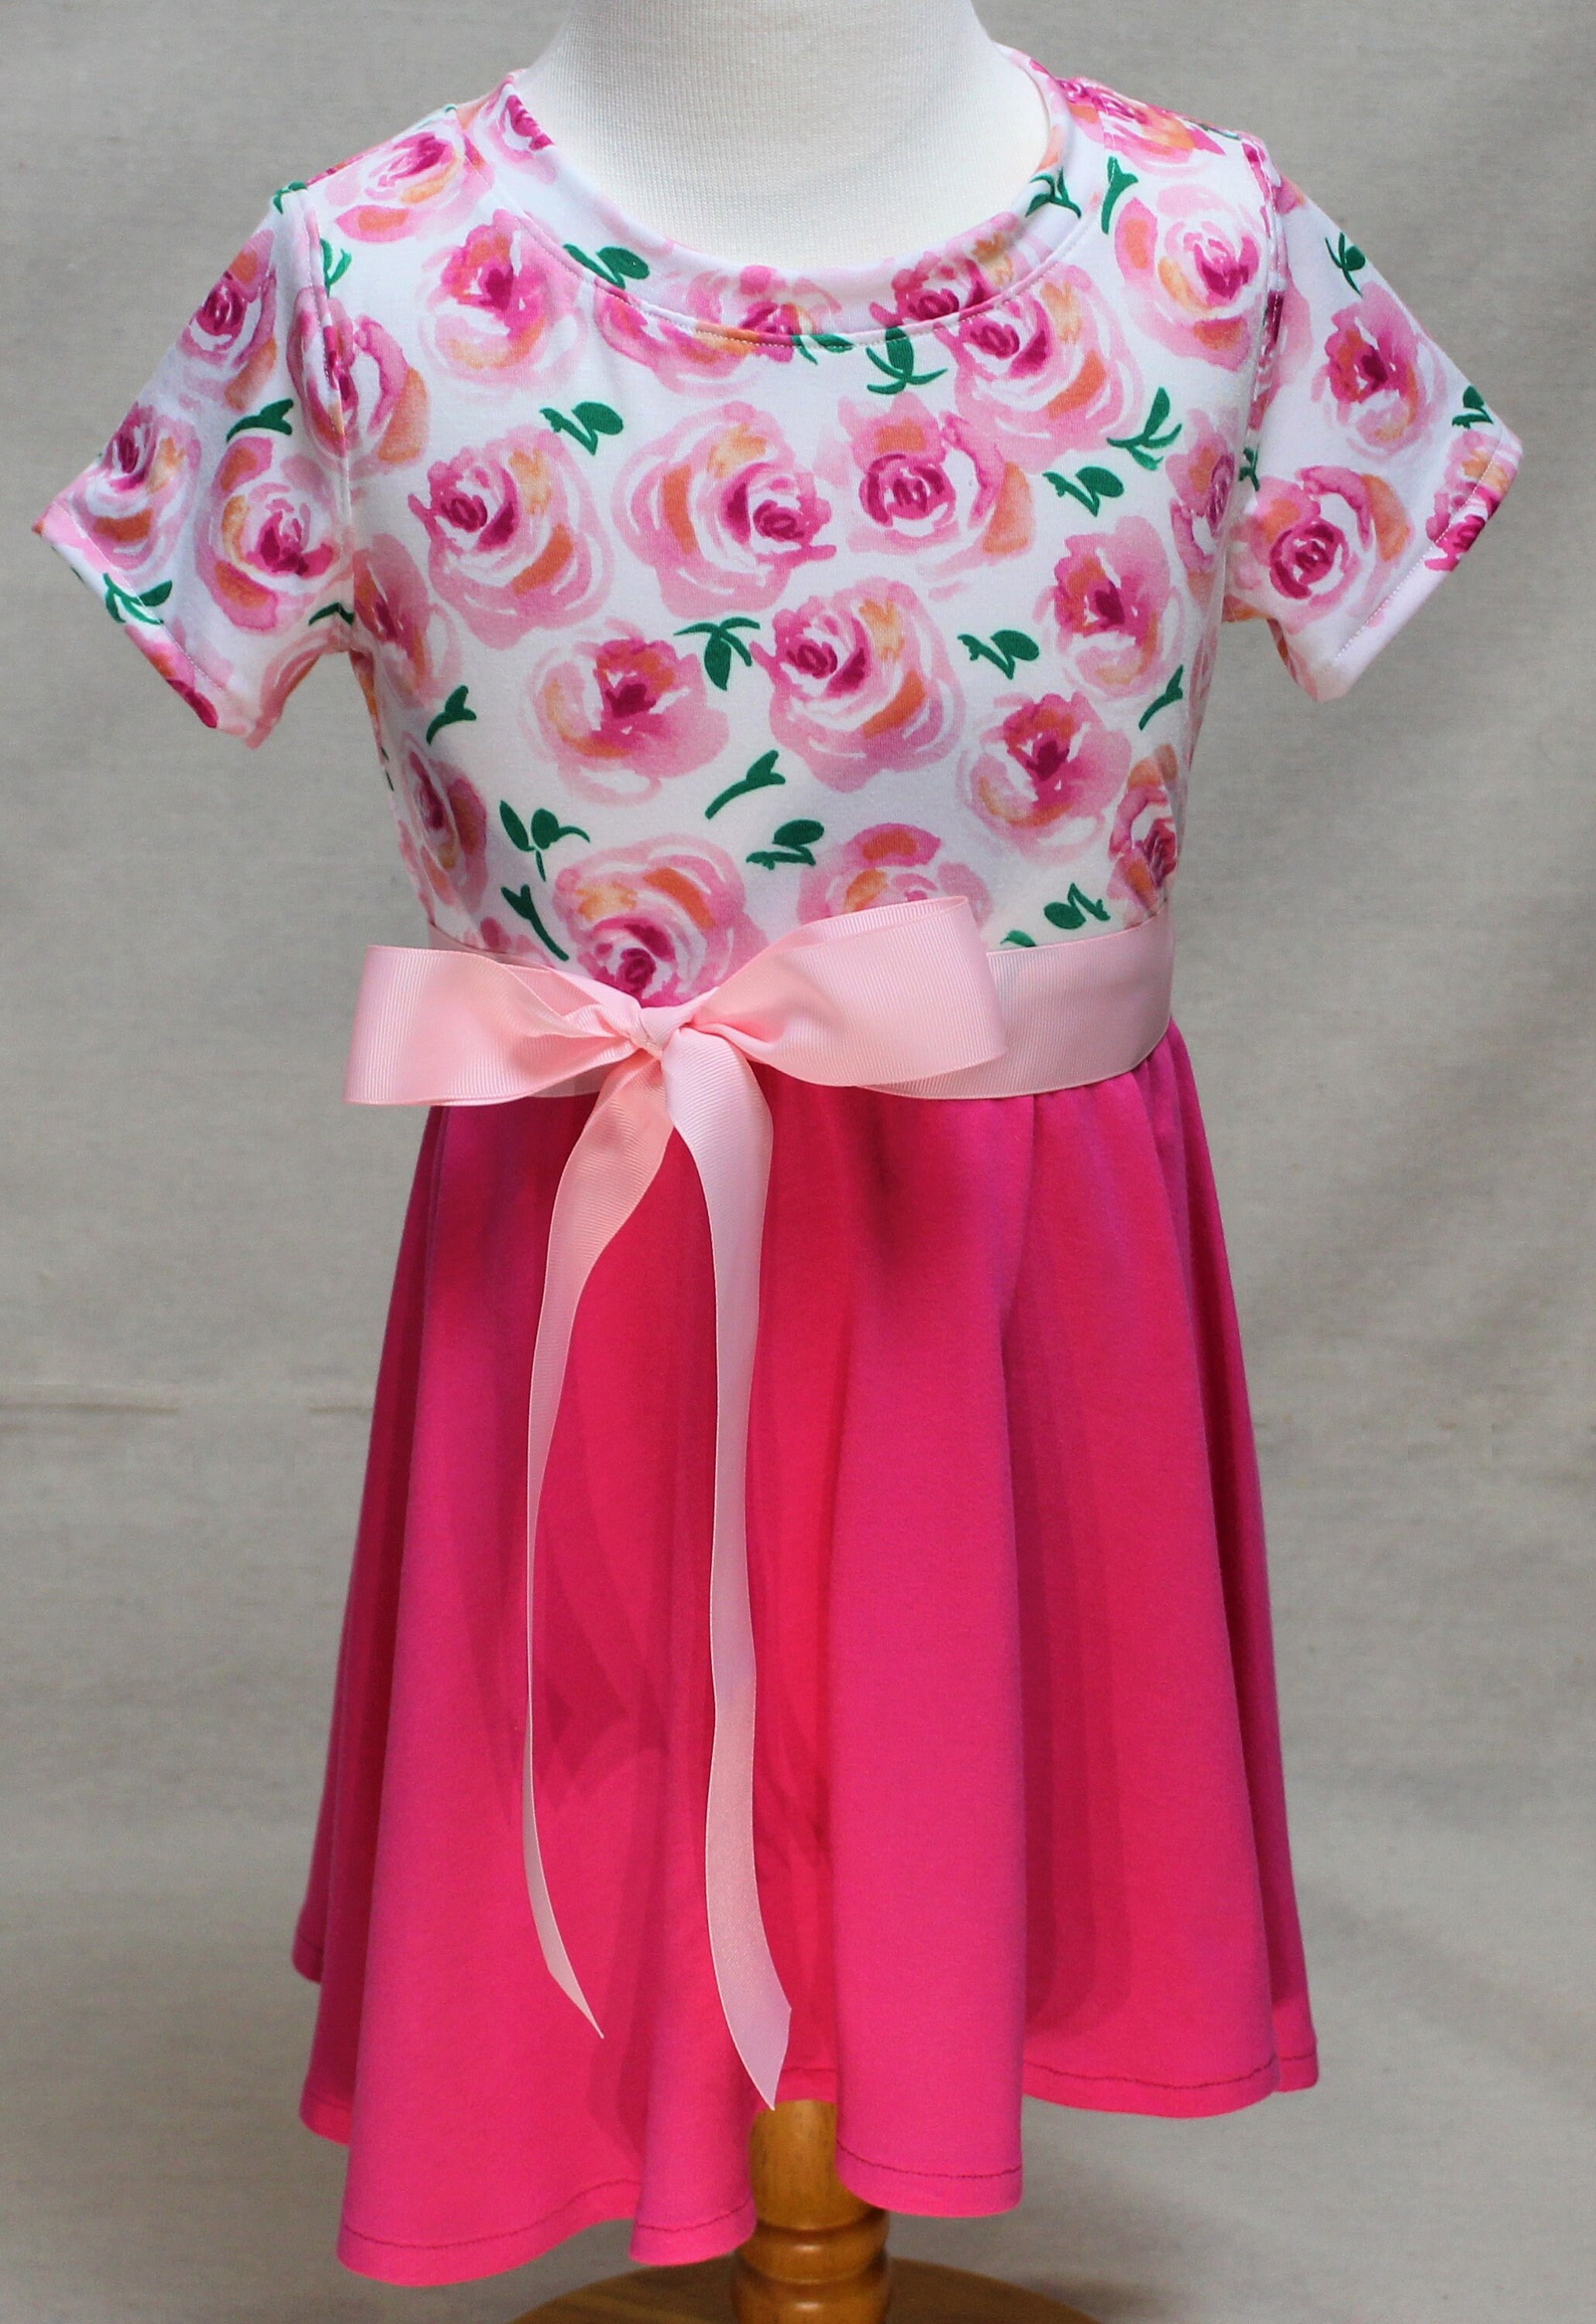 Pink T-shirt Dress With Floral Bodice - Etsy New Zealand